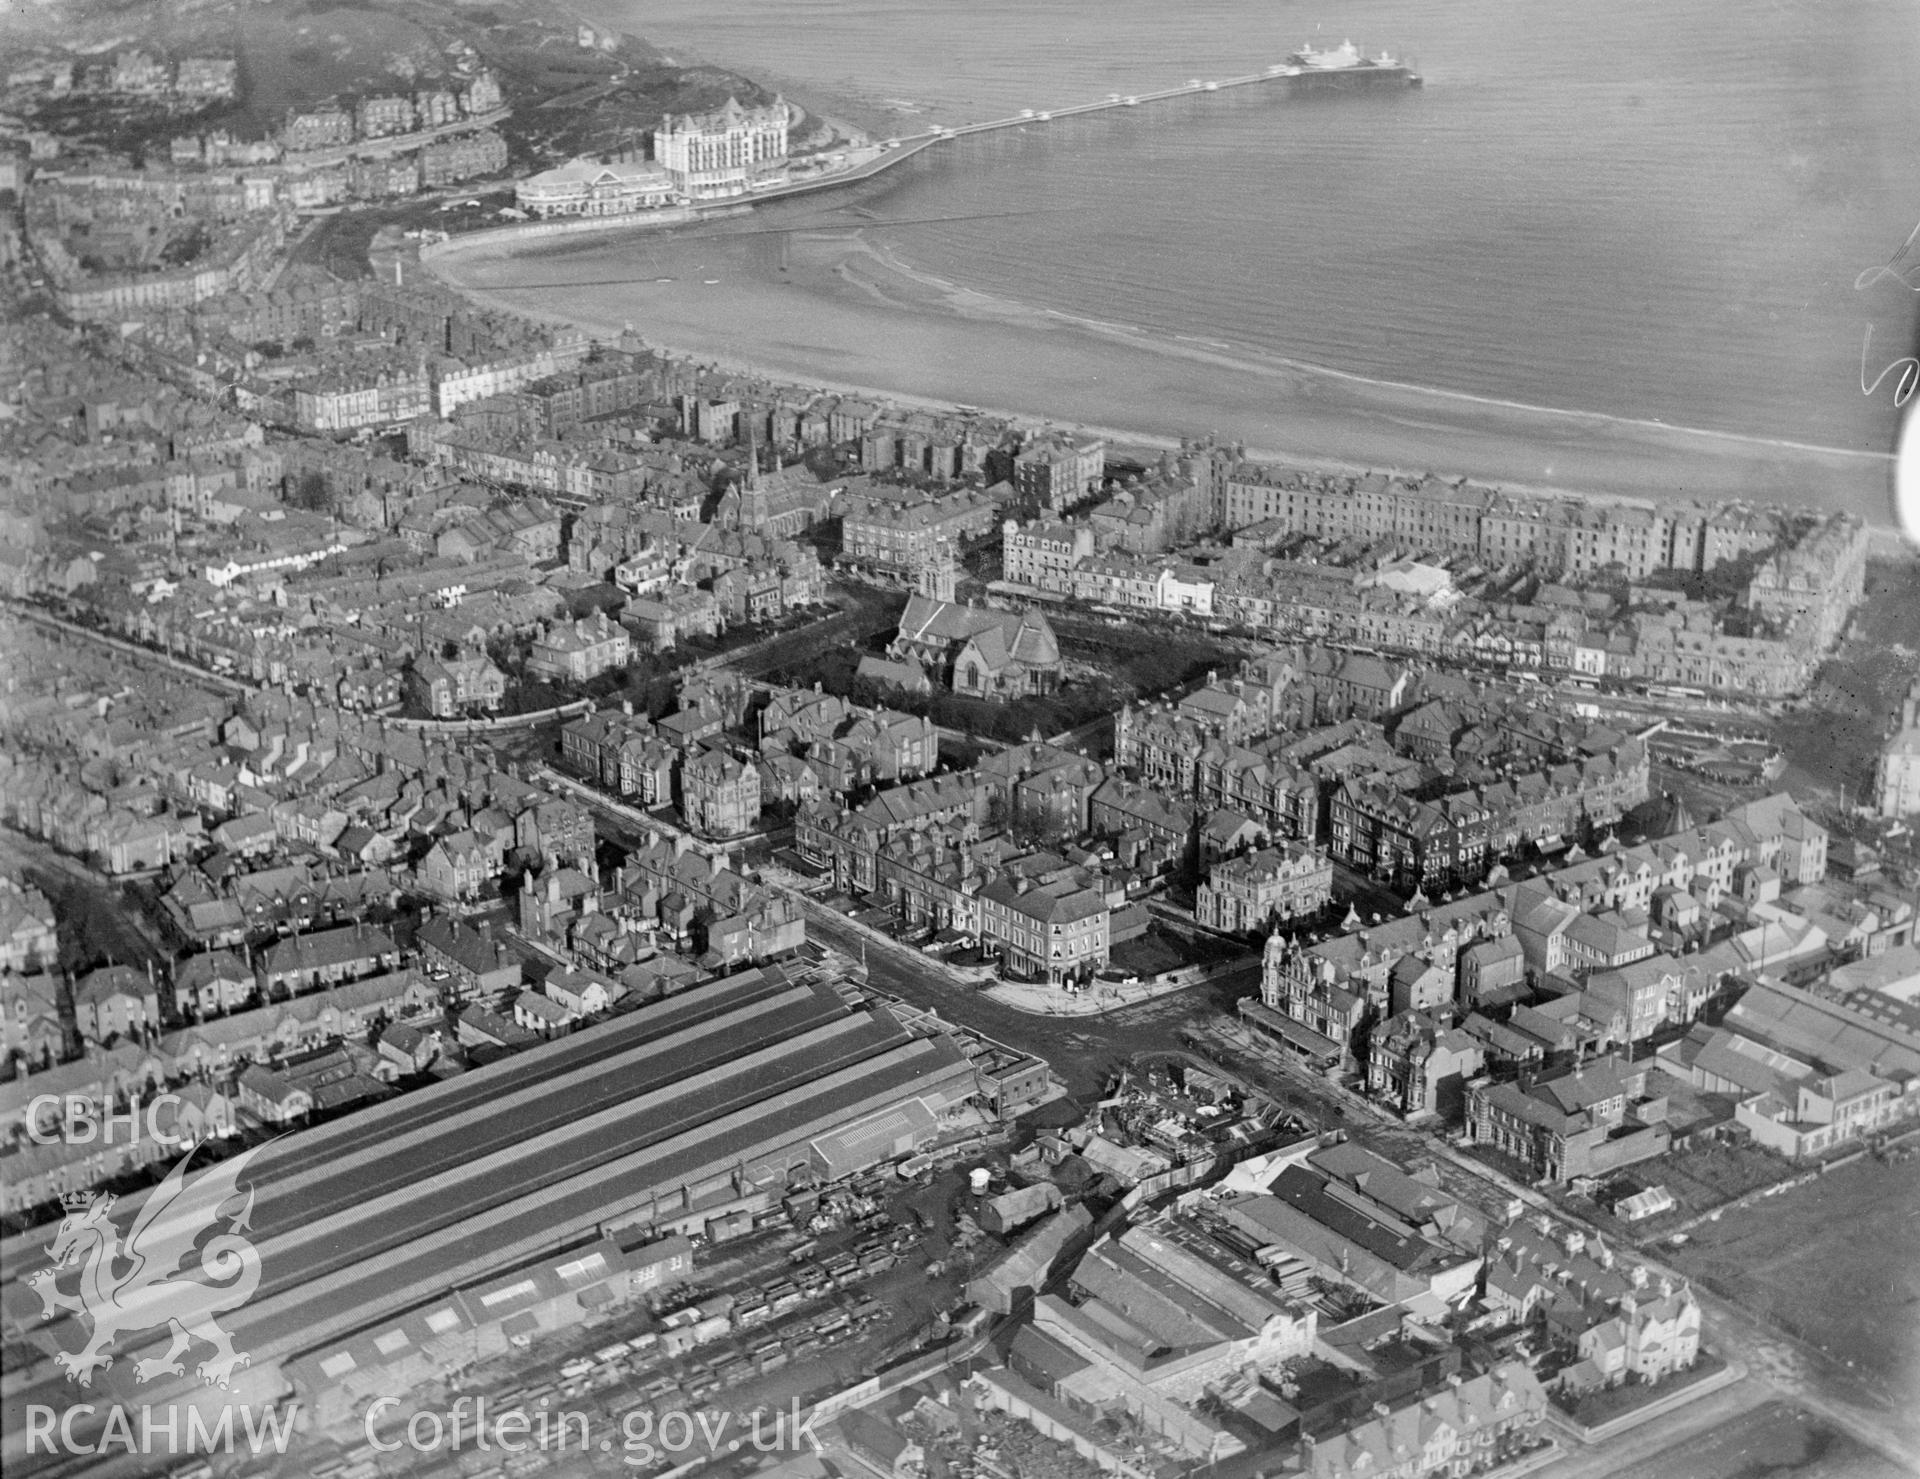 General view of Llandudno showing pier and station, oblique aerial view. 5?x4? black and white glass plate negative.